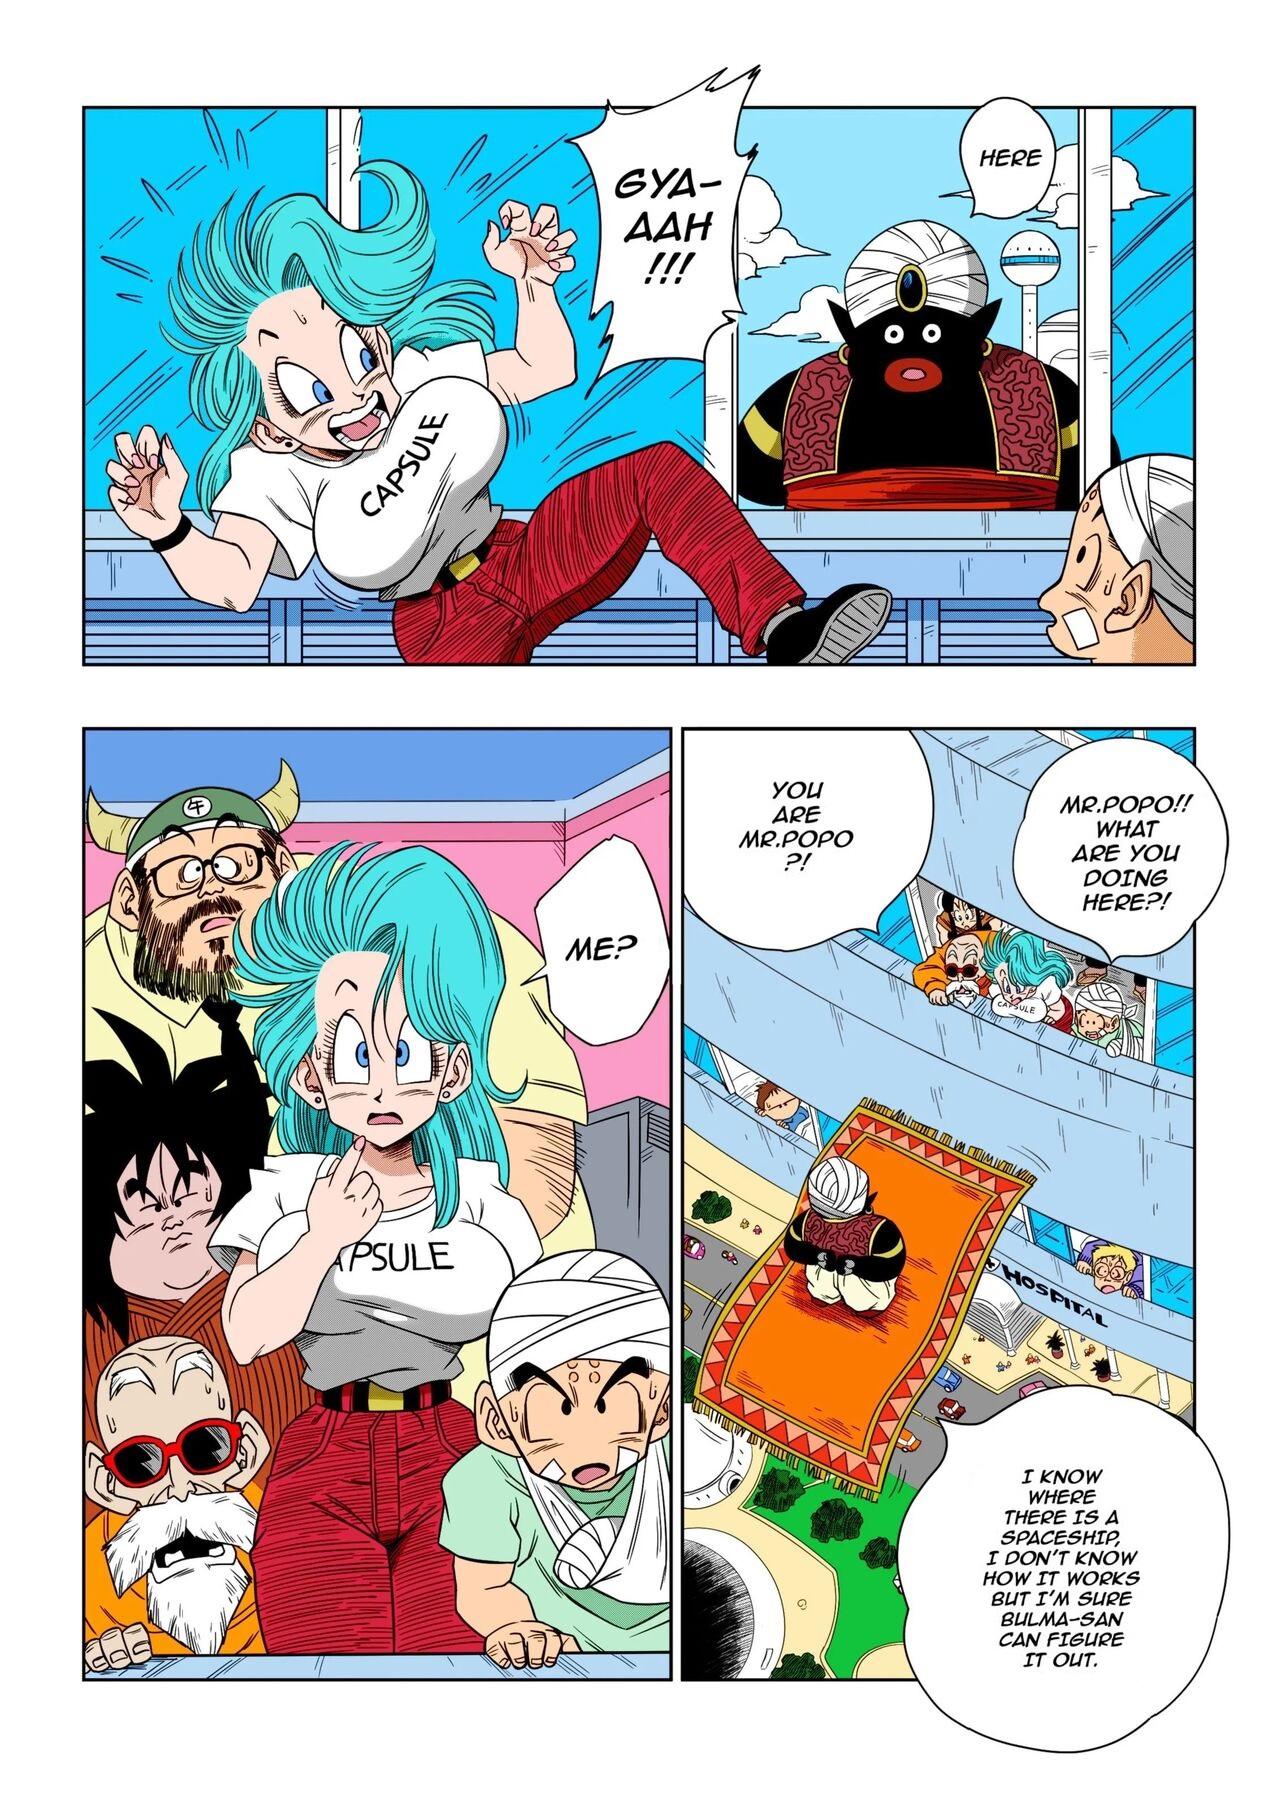 Blowing [Yamamoto] Dagon Ball - Bulma Meets Mr. Popo - Sex Inside the Mysterious Spaceship [English] (decensored) - Dragon ball z Japanese - Picture 2